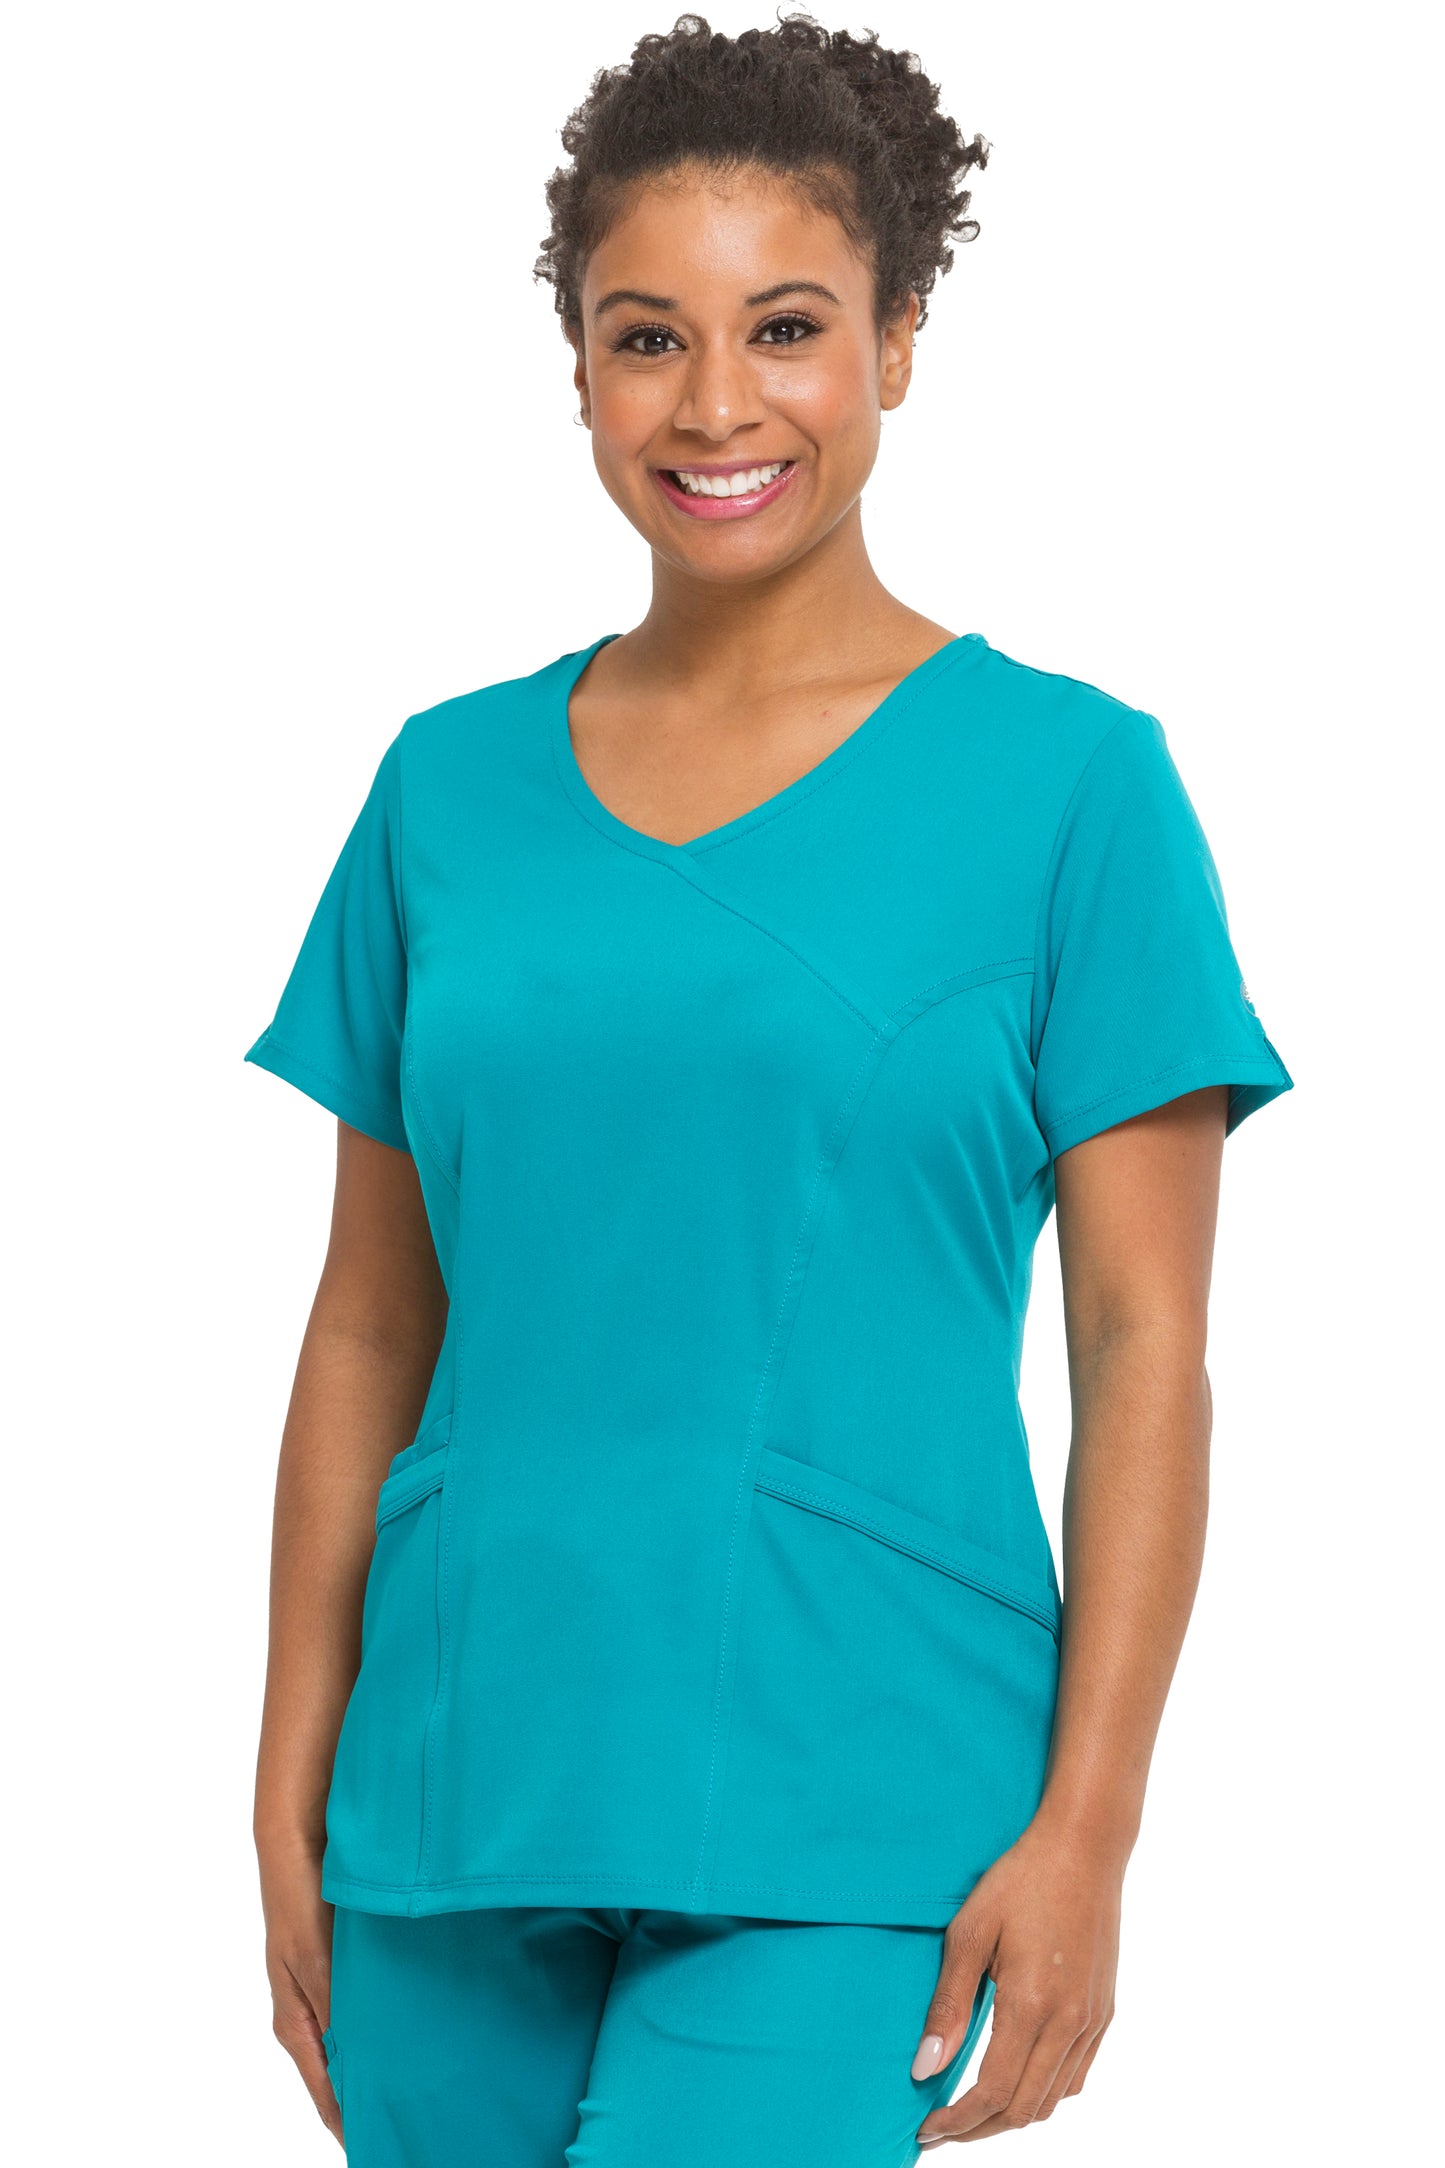 Healing Hands HH Works Madison Mock Wrap Scrub Top in Teal at Parker's Clothing and Shoes